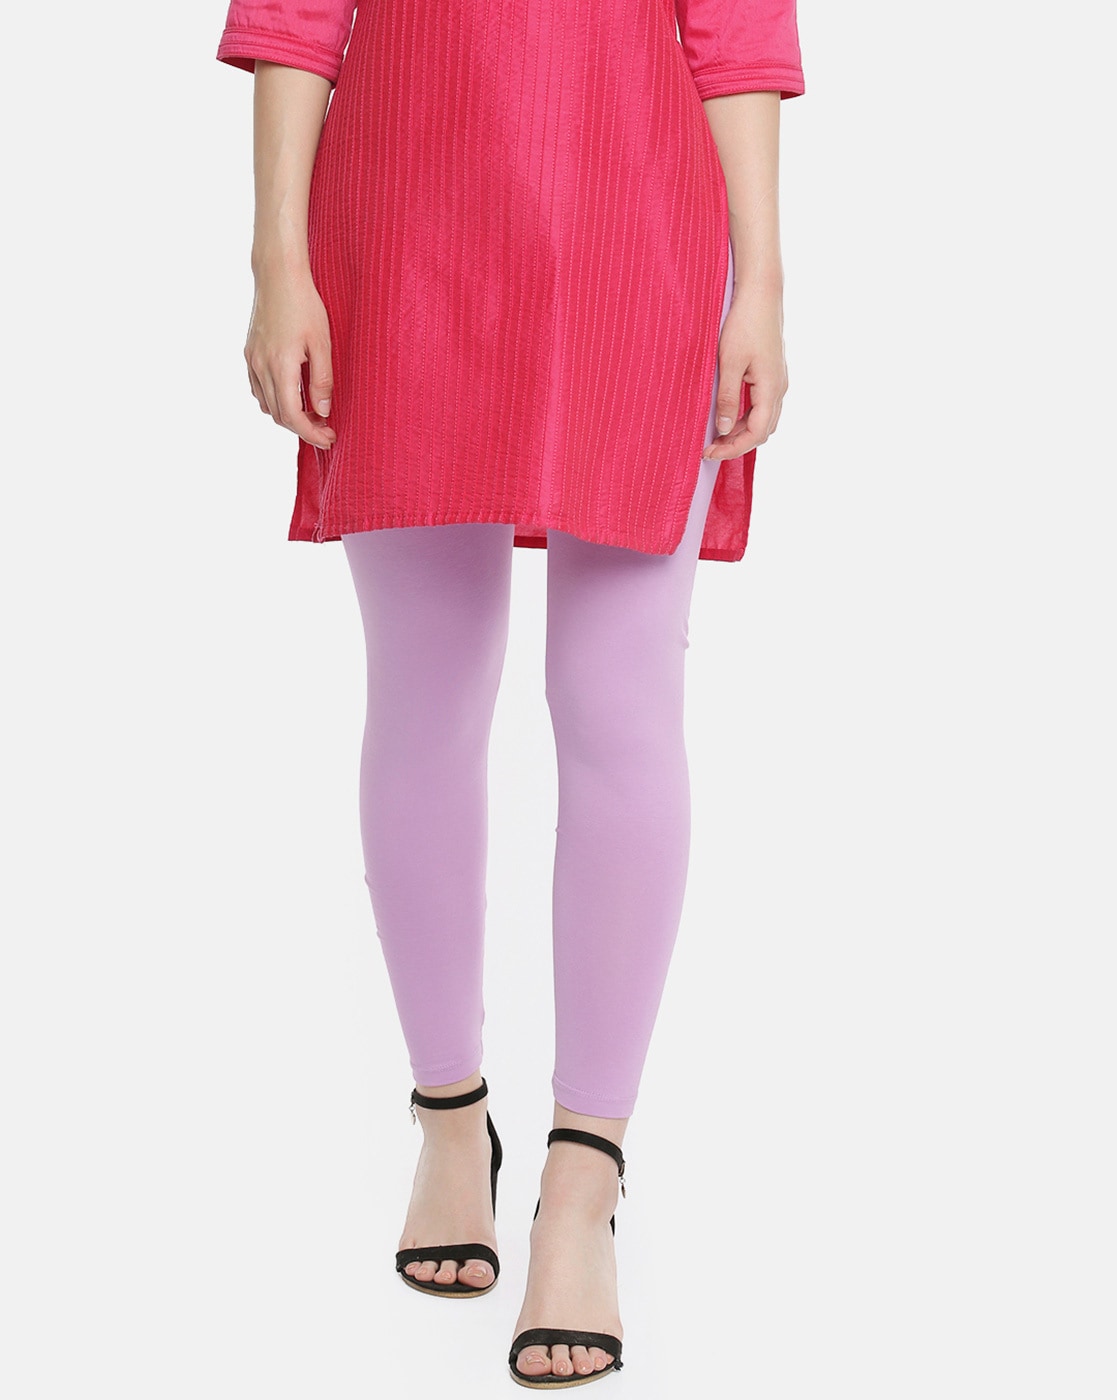 Buy Dollar Missy Combo Of 2 Red And Light Onion Color Stretchy;Fancy And  Comfortable Churidar Leggings Online at Low Prices in India - Paytmmall.com